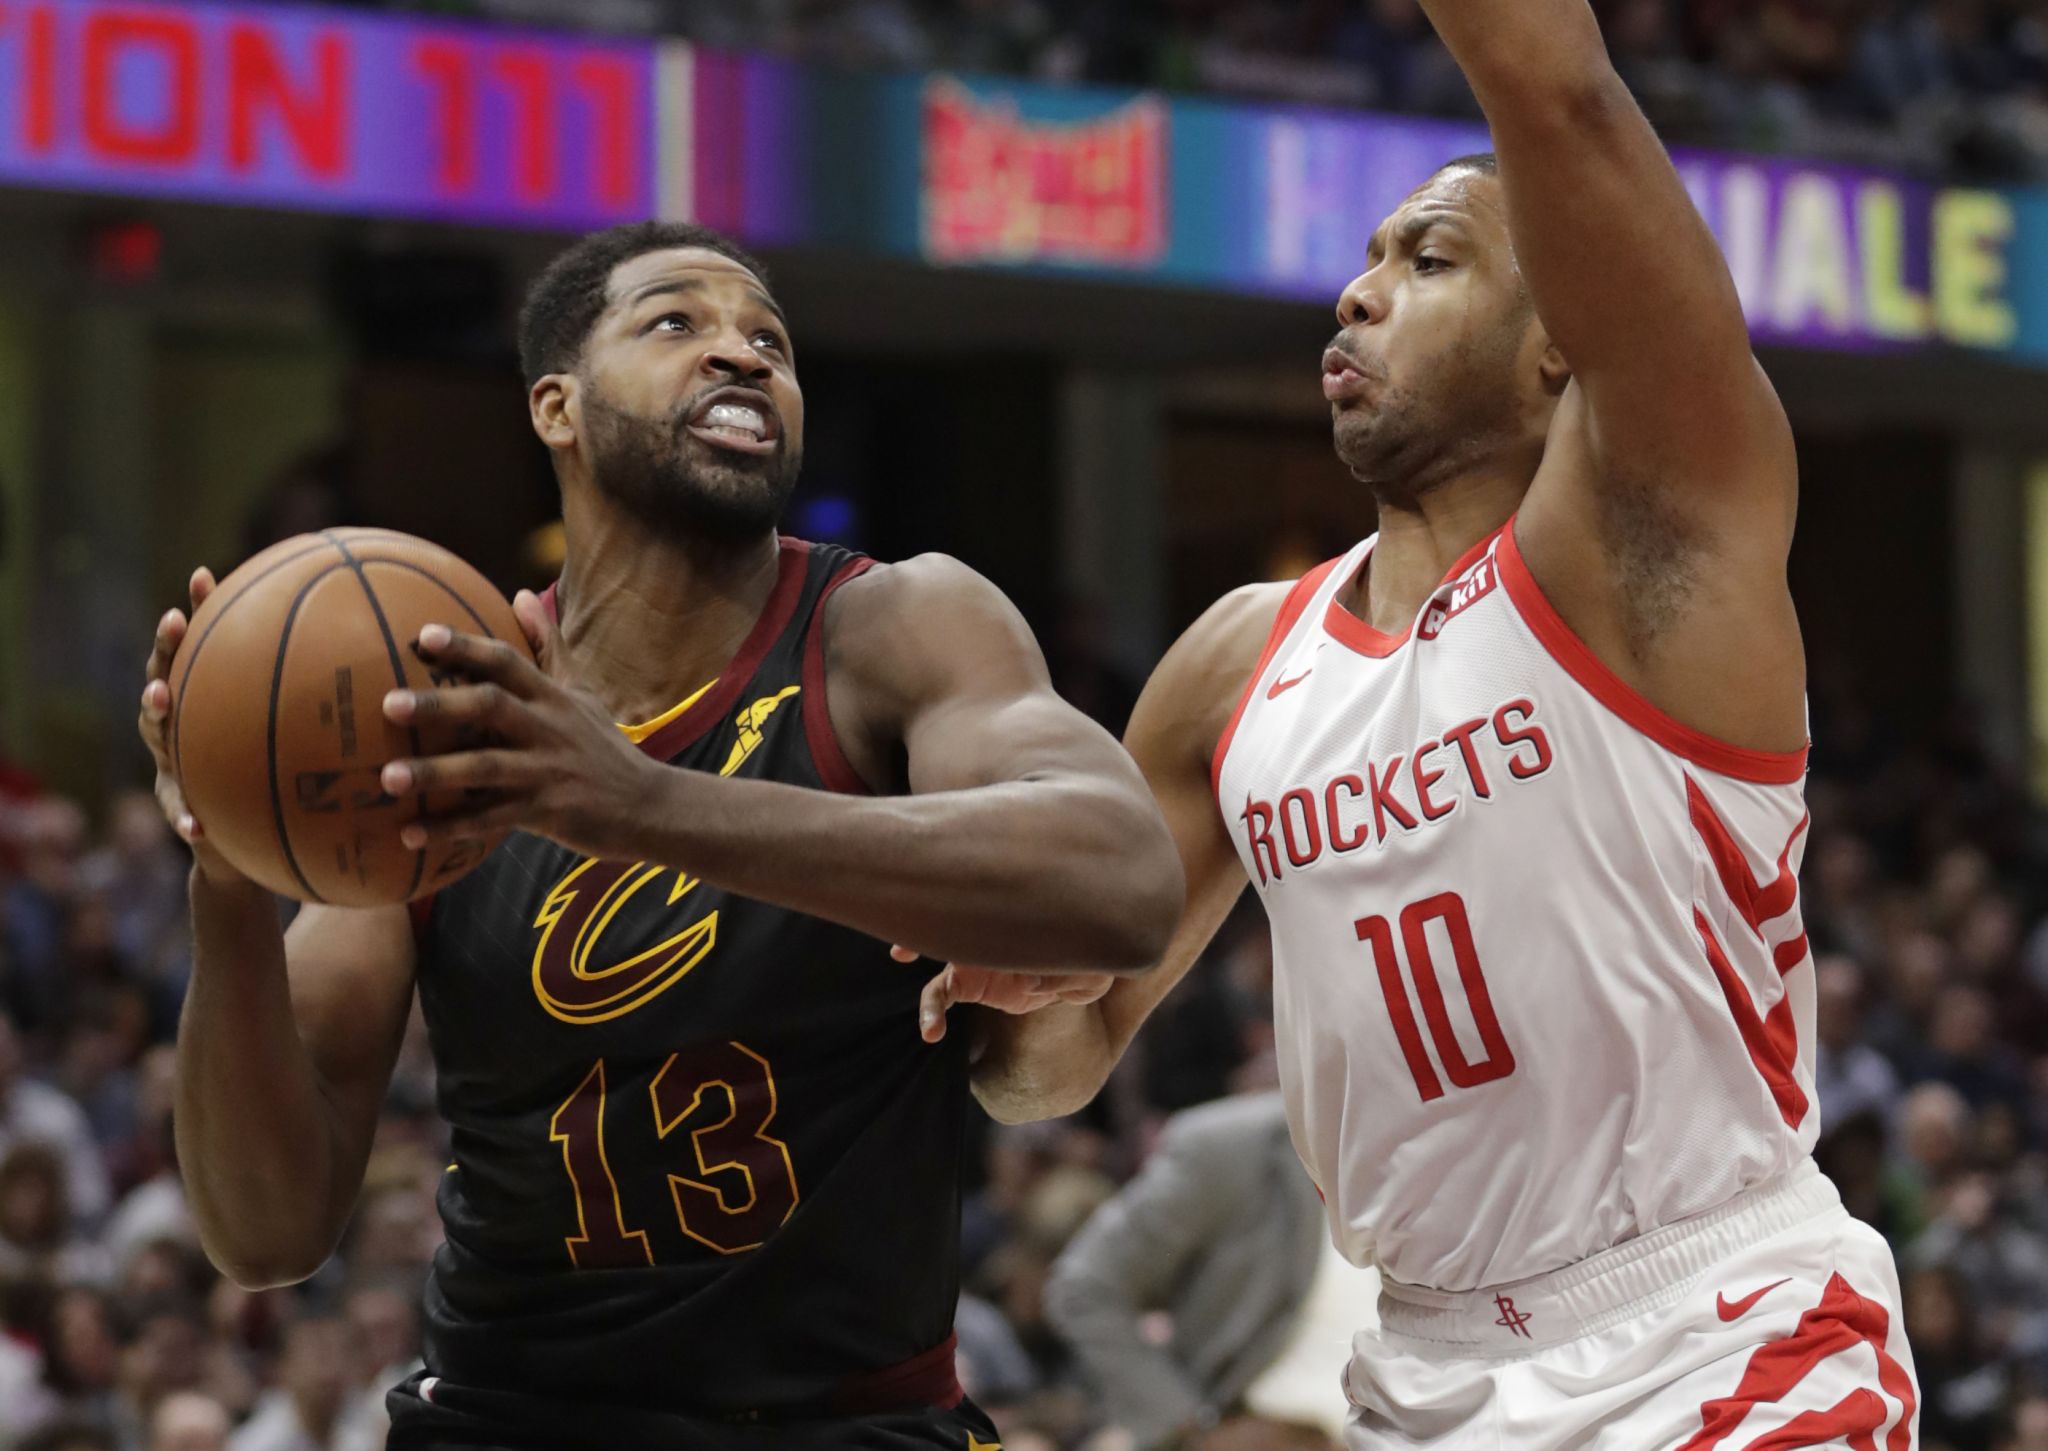 Scouting report: Rockets vs. Cavaliers